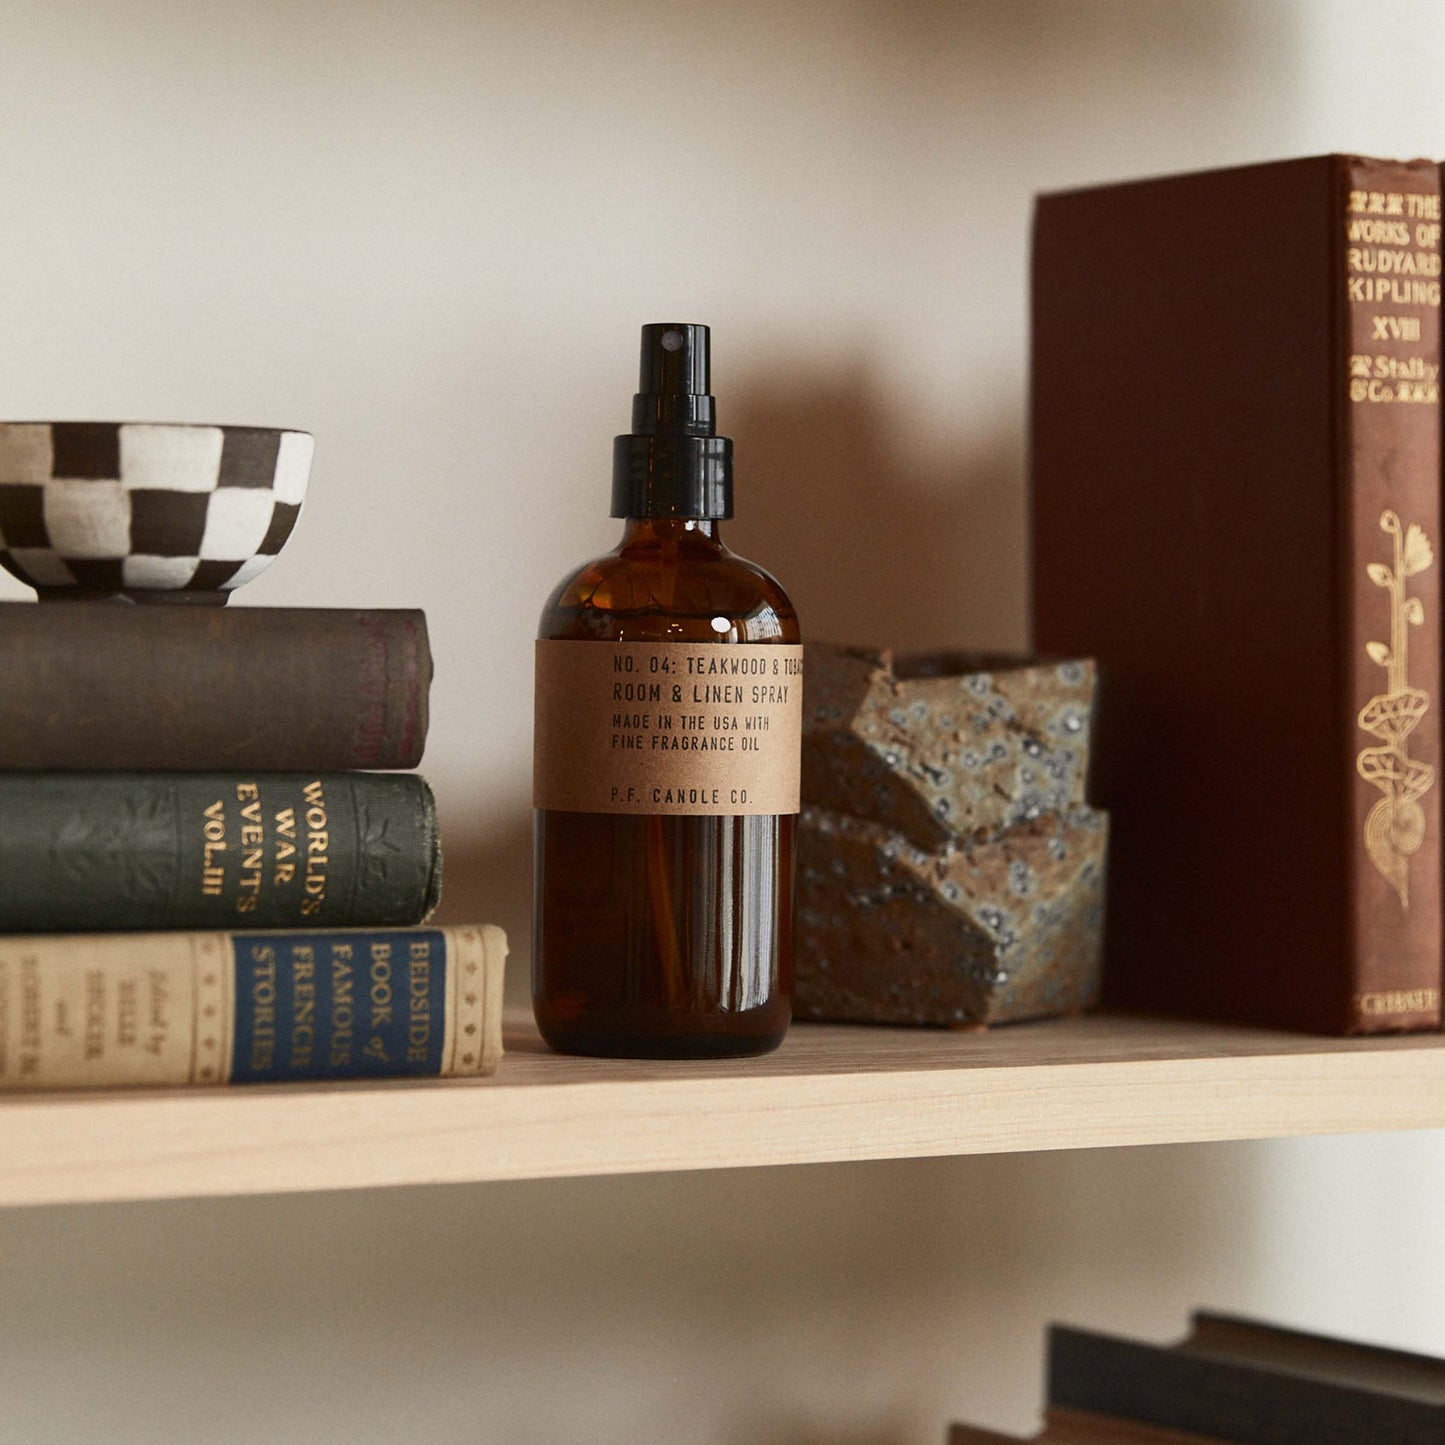 P.F. Candle Co. Room & Linen Spray, NO. 04 Teakwood & Tobacco